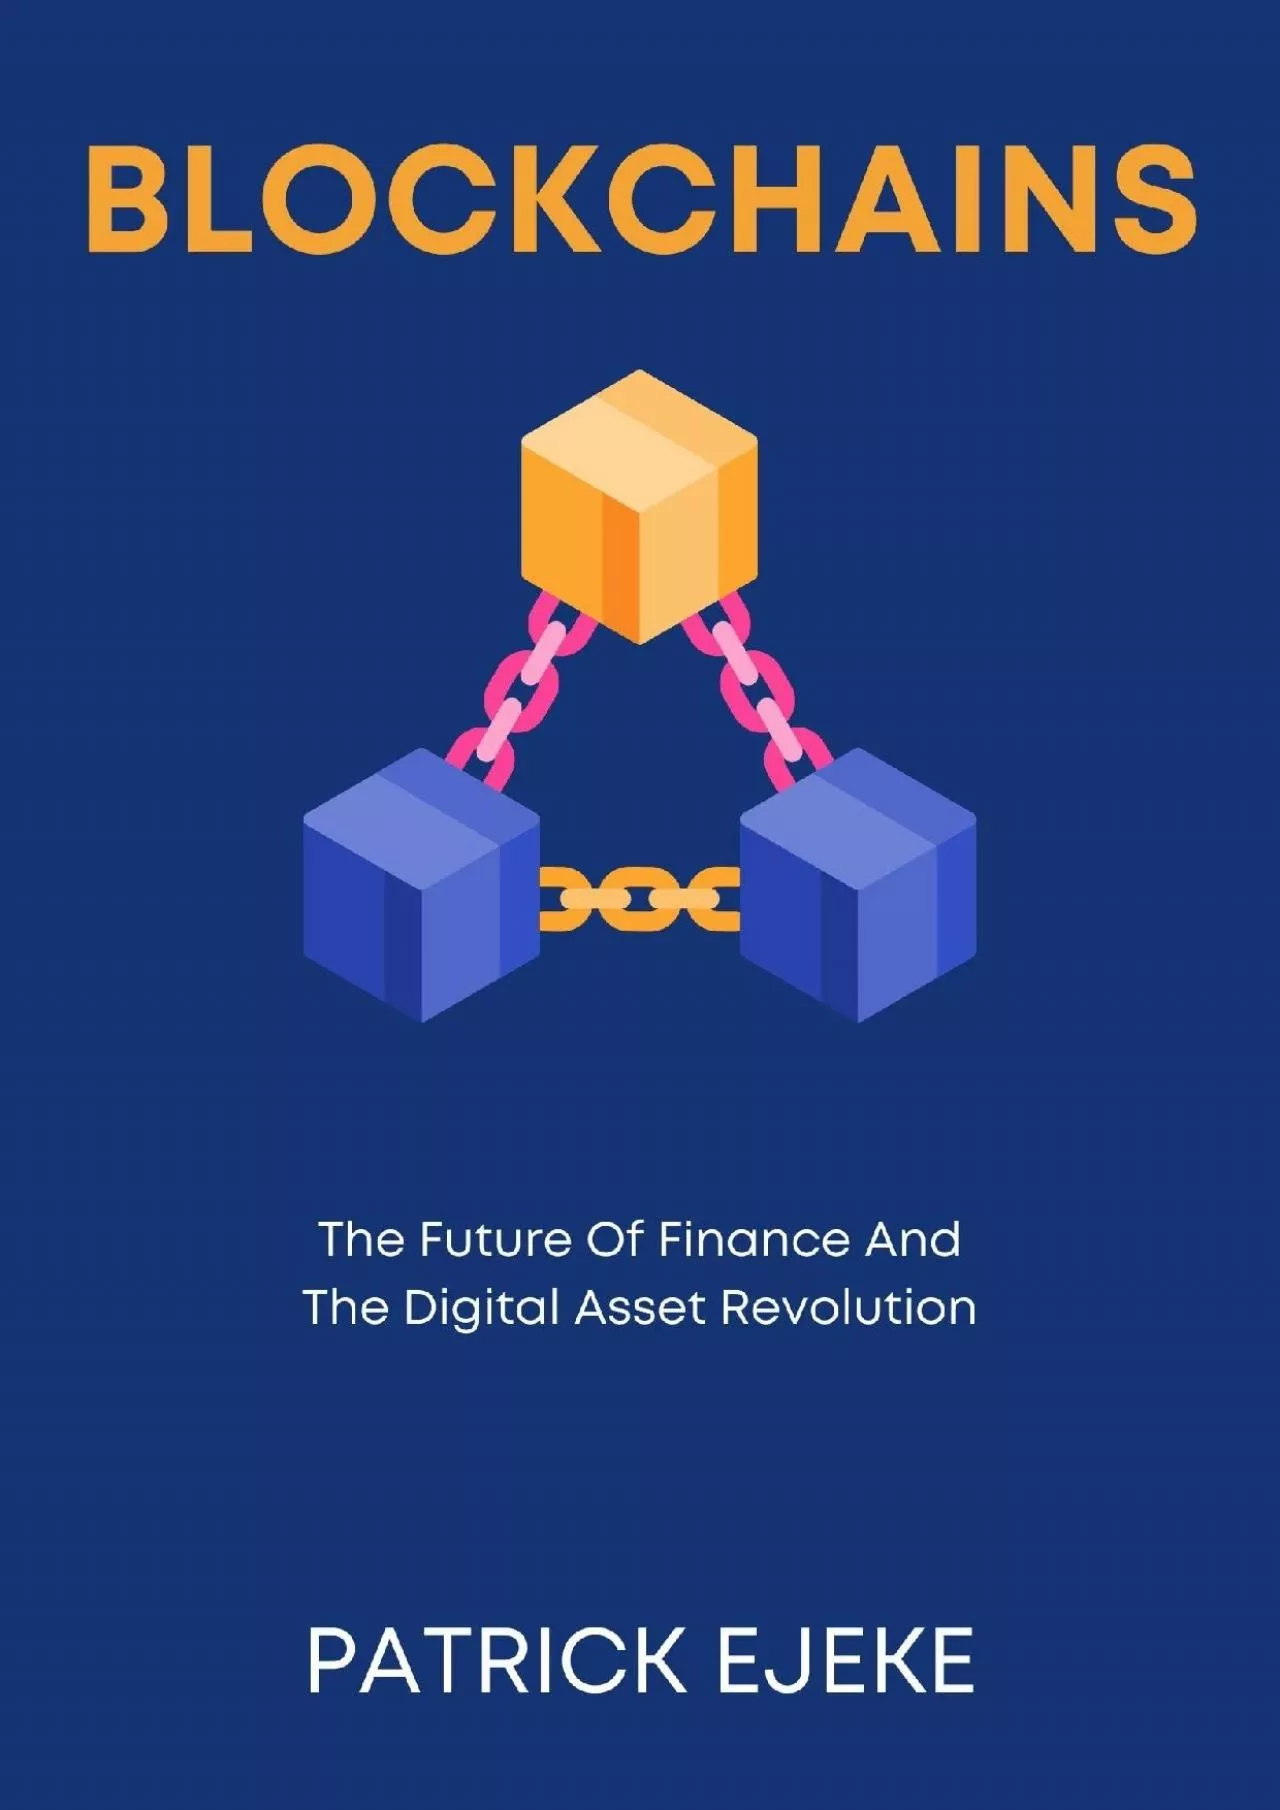 (EBOOK)-BLOCKCHAINS: Intro To The Future Of Finance, Cryptography, DeFi, Proof Of Work,